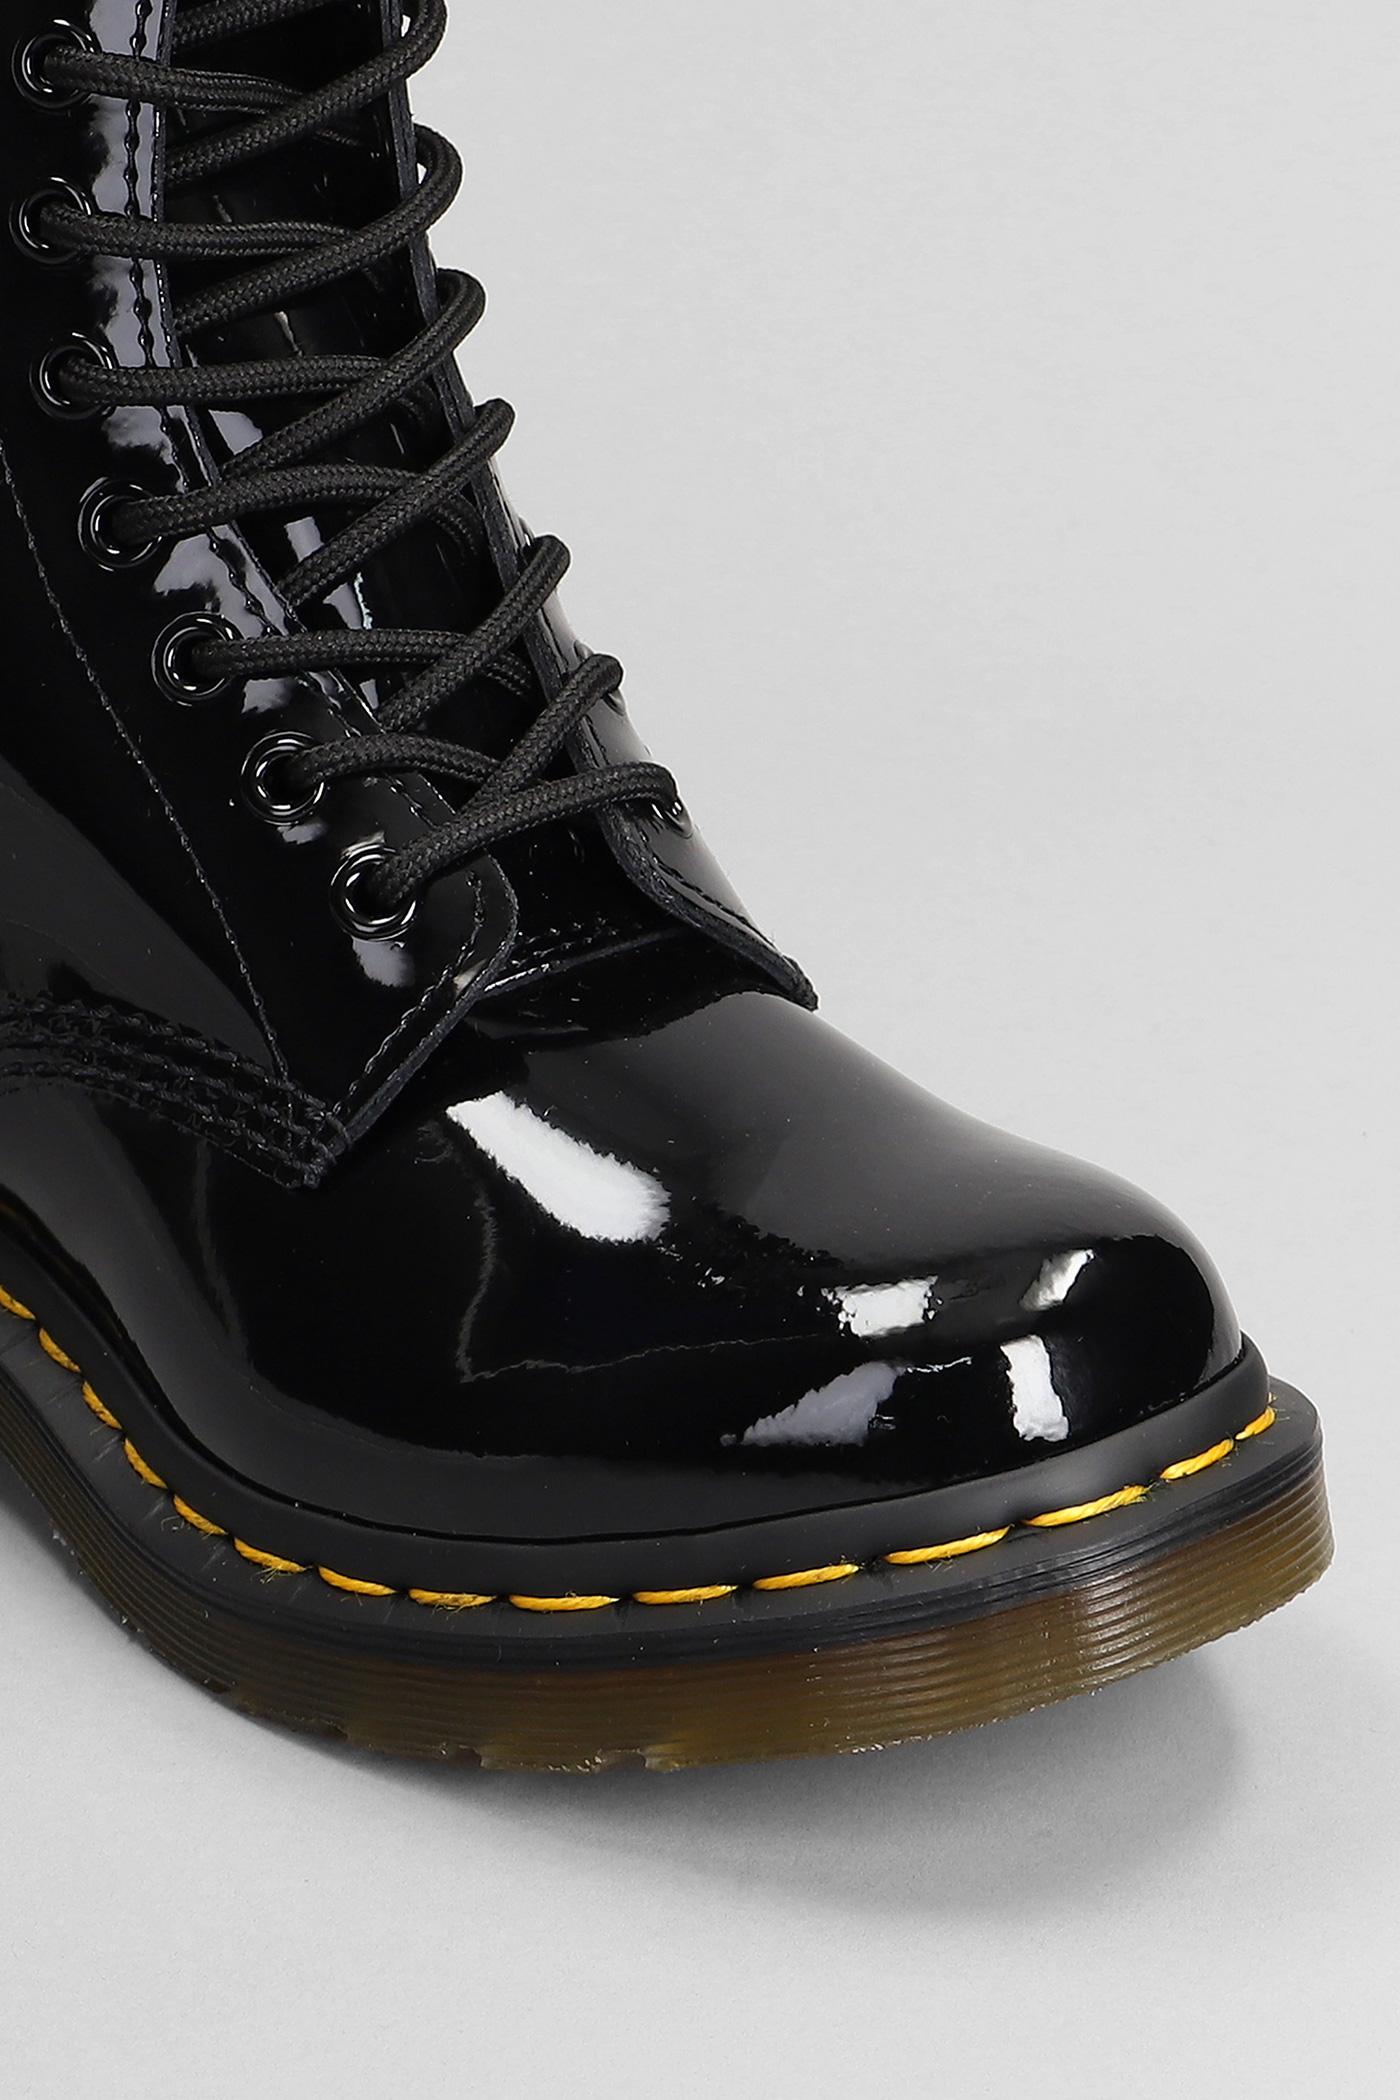 Dr. Martens 1460 Combat Boots In Black Patent Leather | Lyst